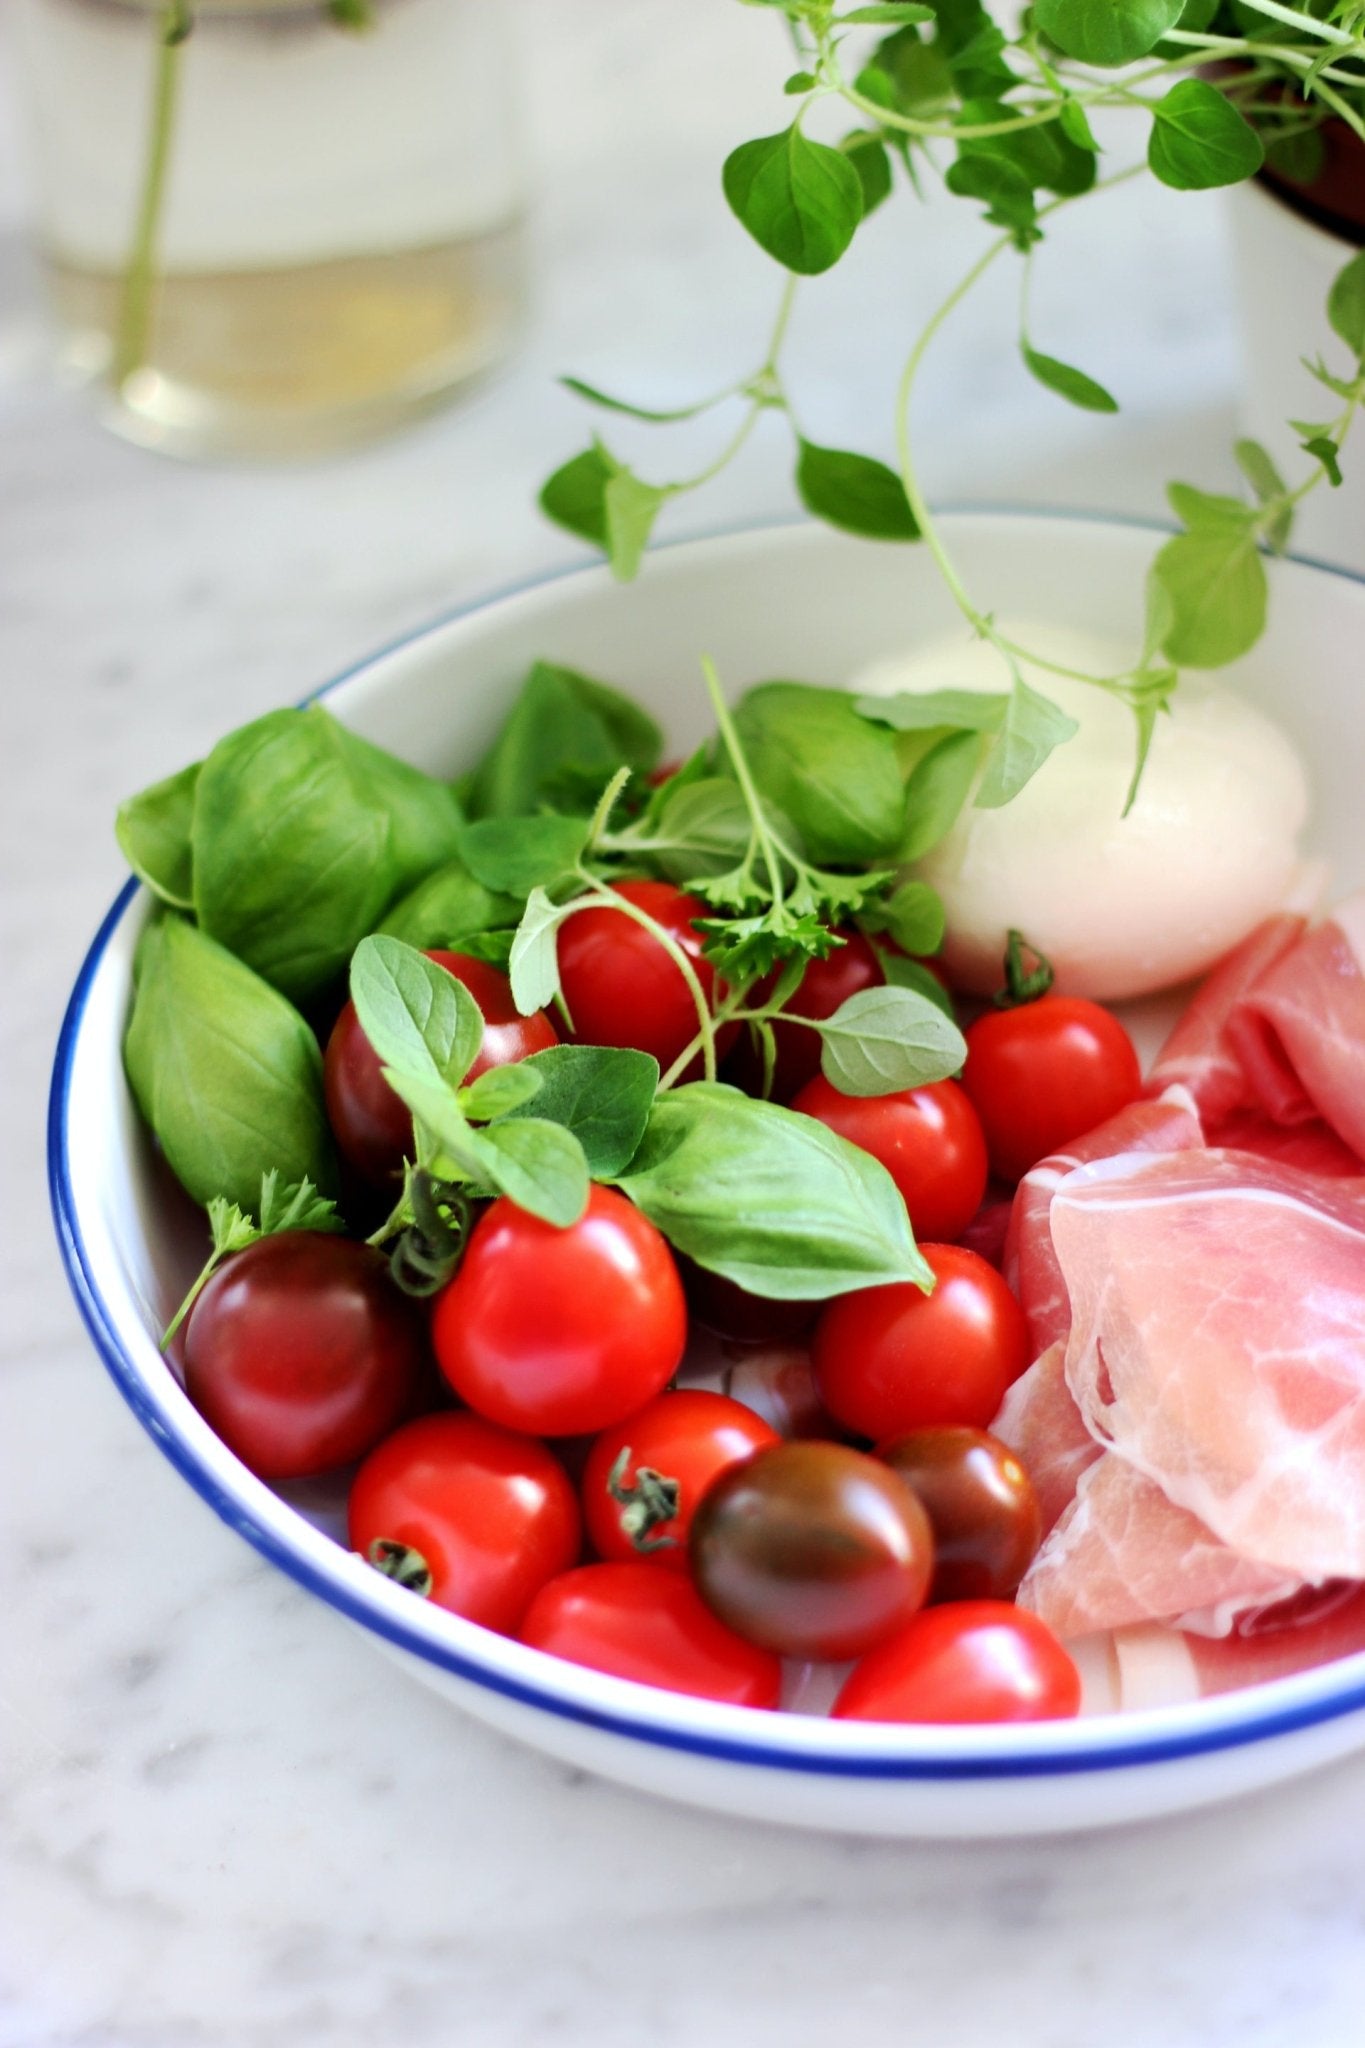 How to get started with the mediterranean diet?